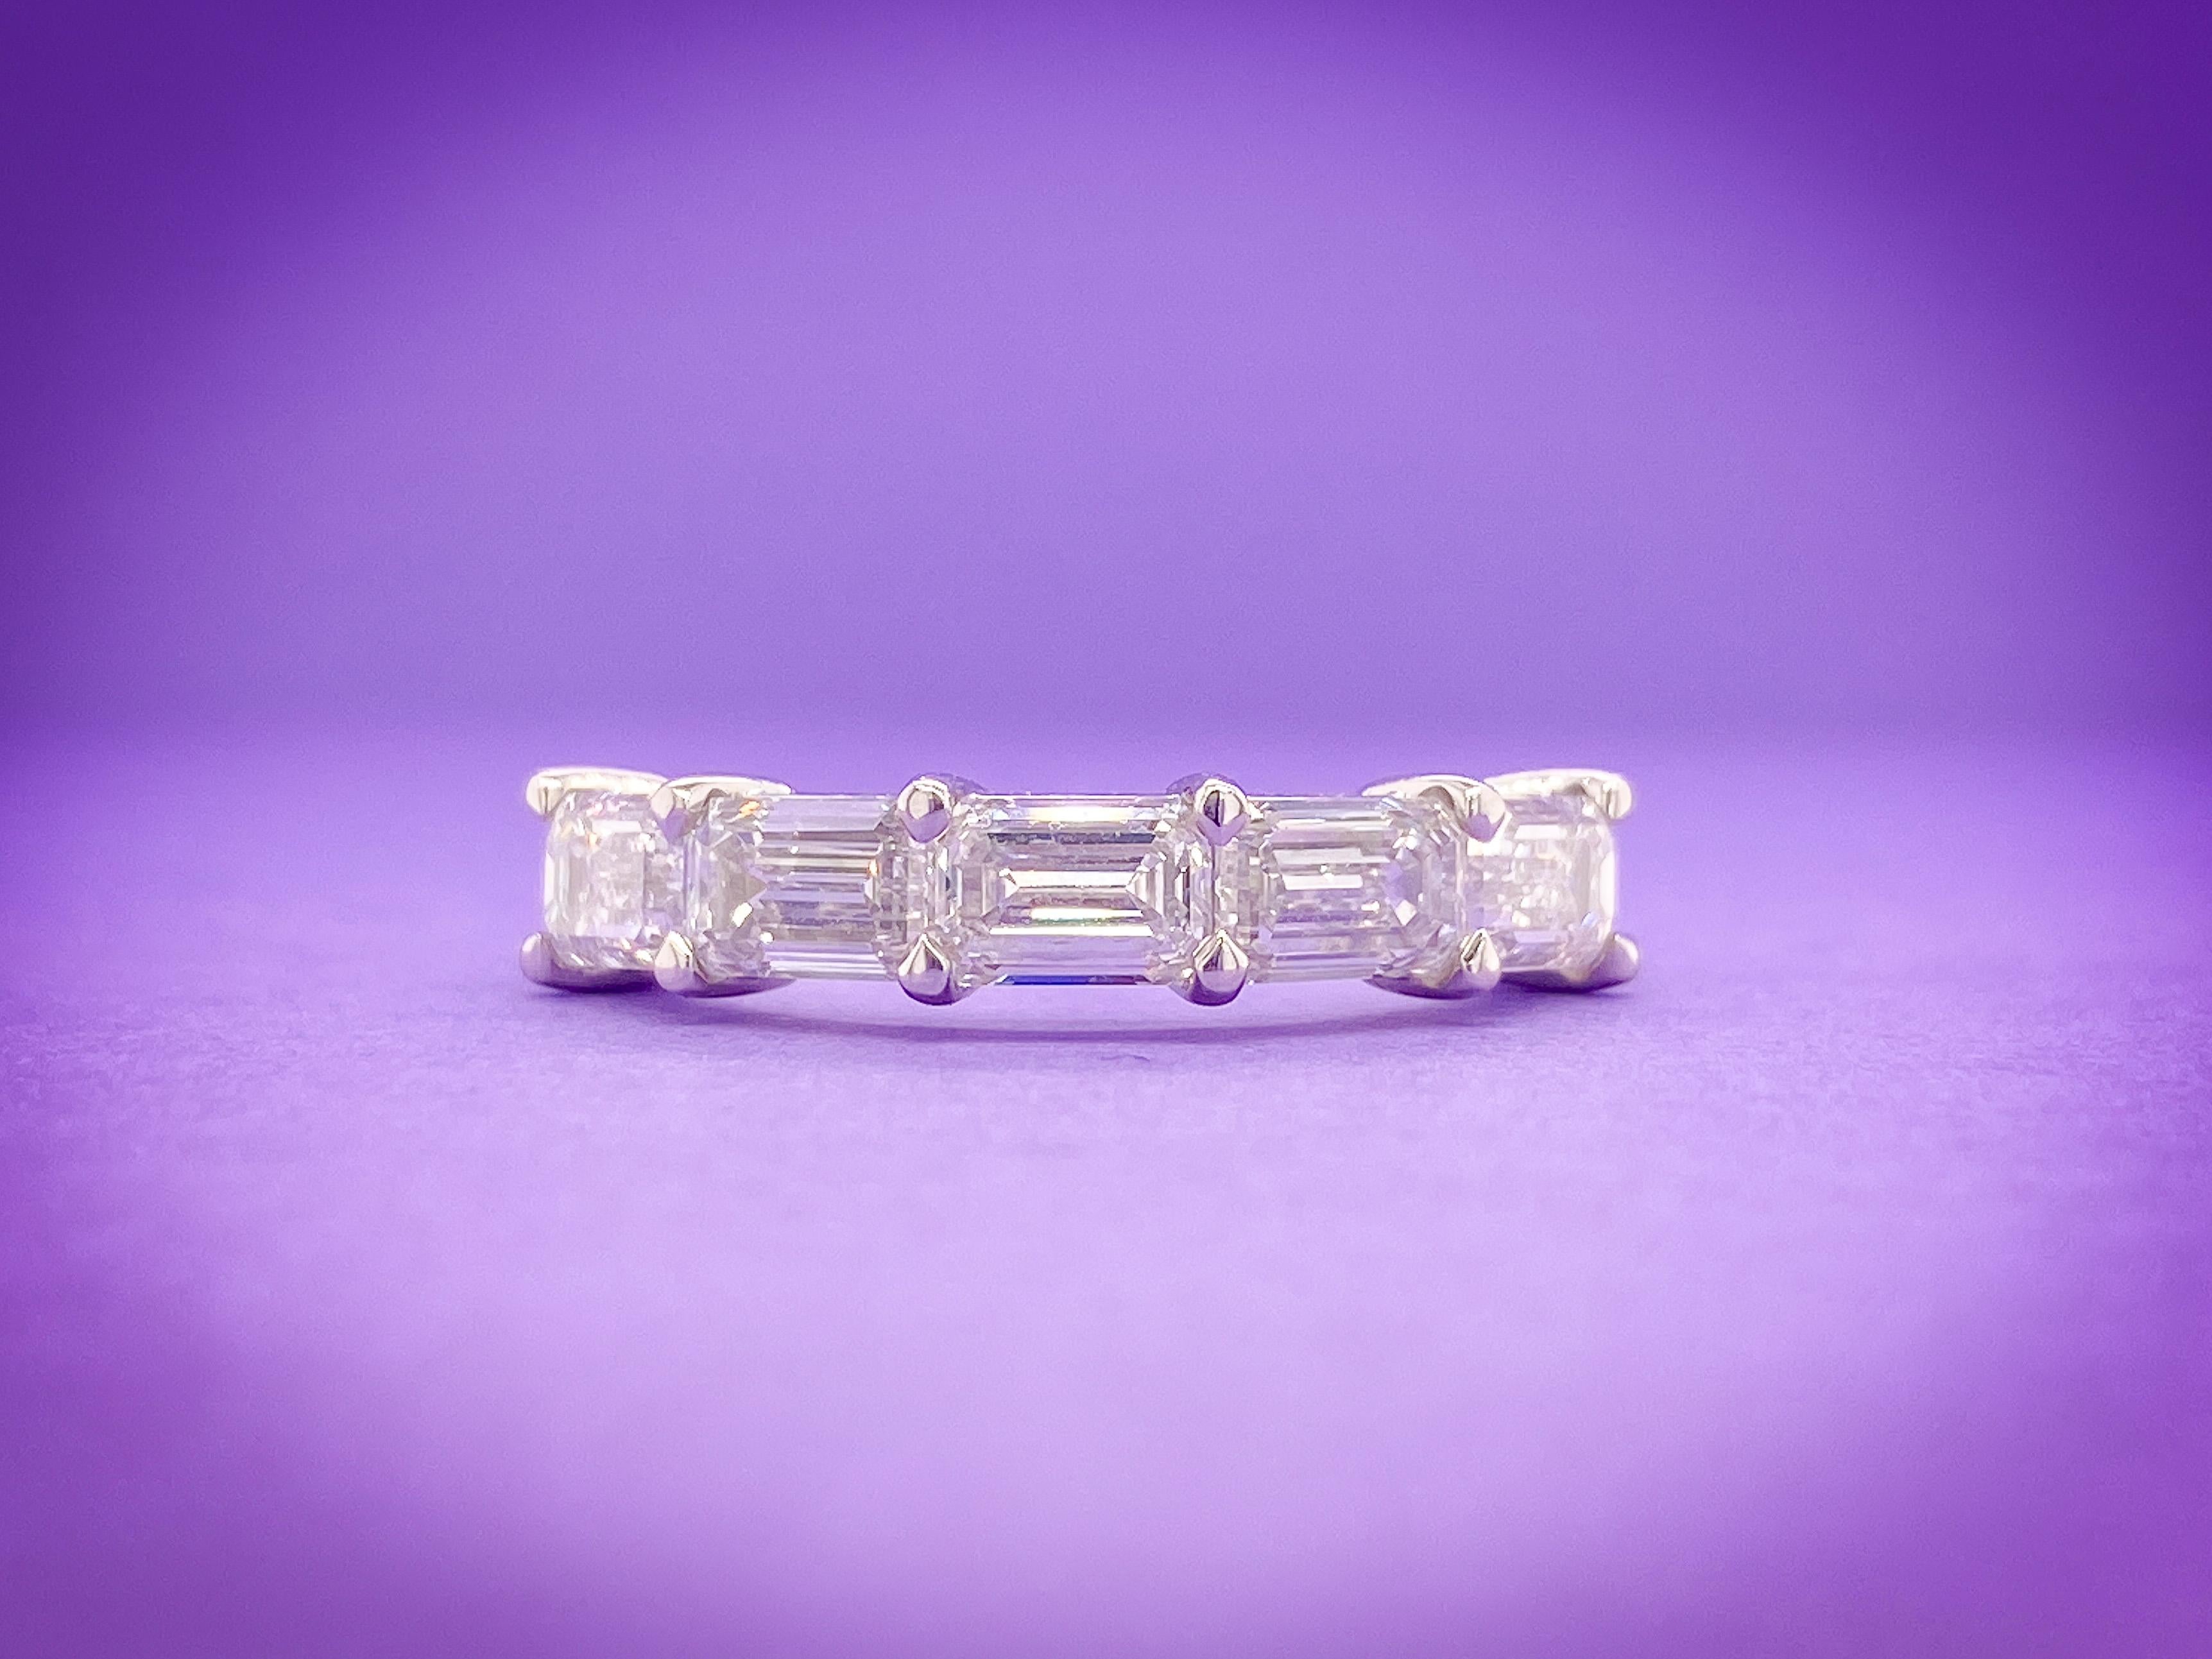 This Emerald Cut Horizontal Anniversary Band features 5 Emerald Cut Diamonds, totaling 2.45 Total Carat Weight. The stones are all GIA Certified D Color with VS Clarity, set Horizontally in a Platinum setting in Finger Size 6.5. 


Need a different